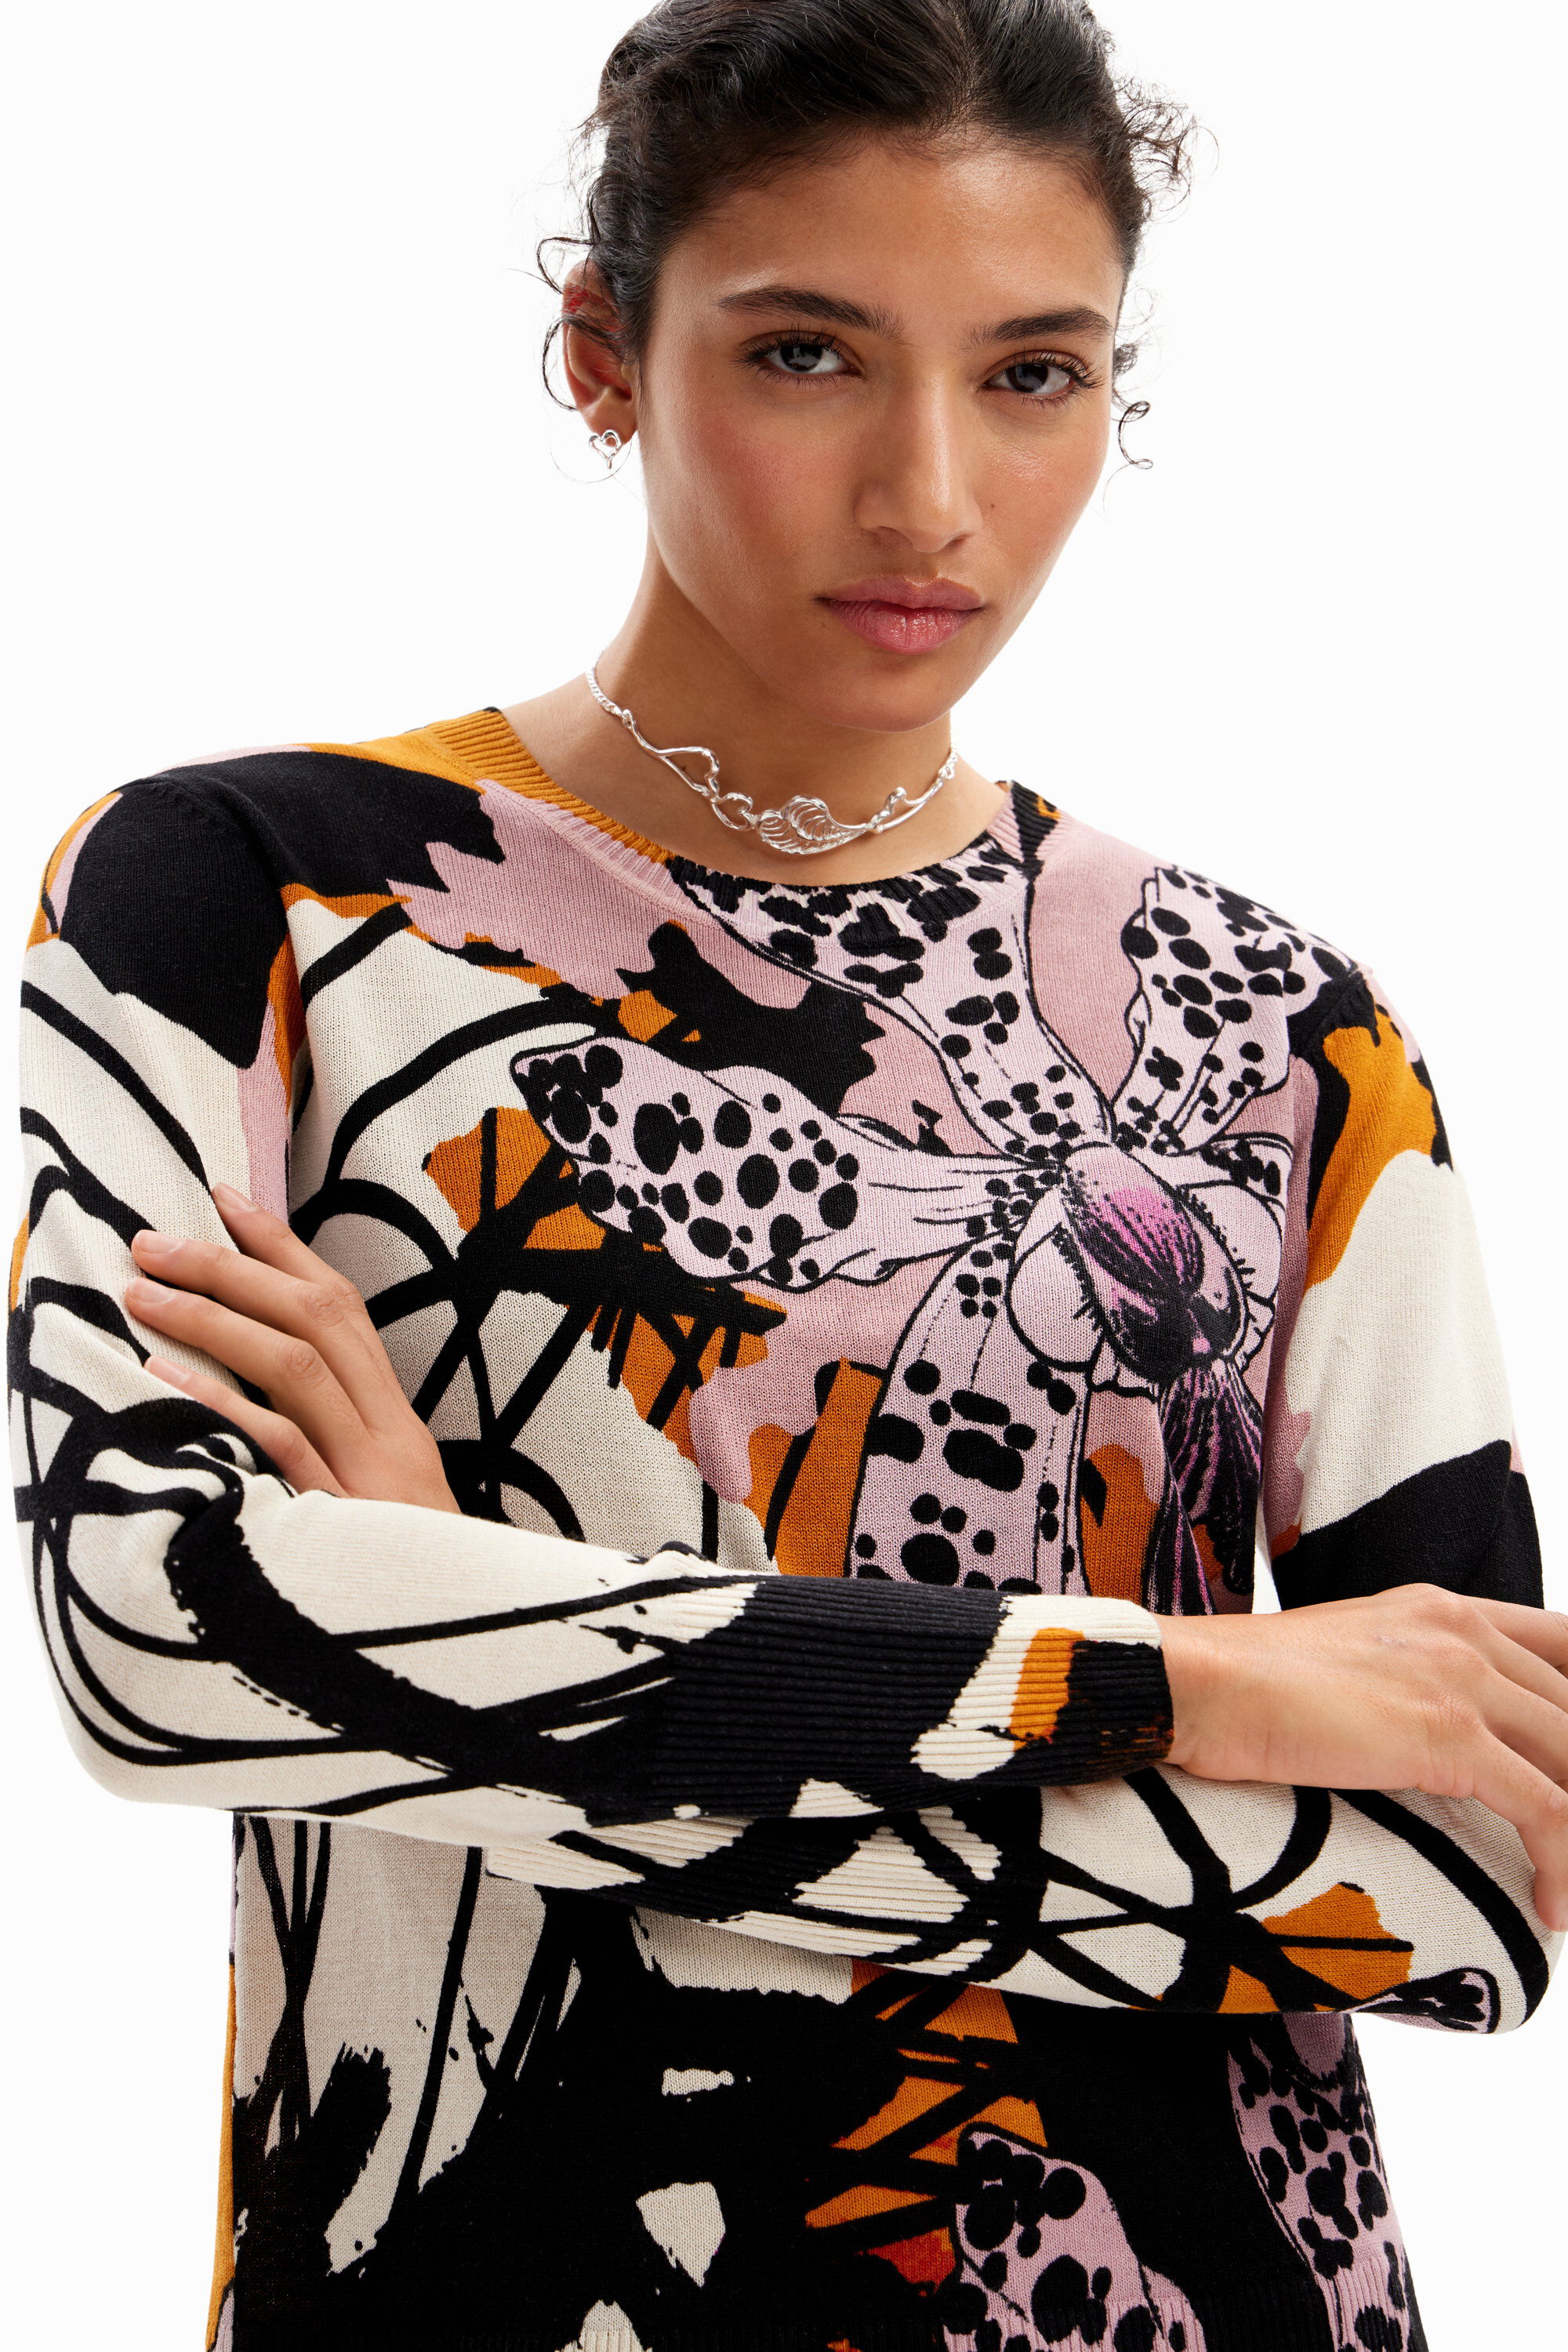 Desigual ORCHID pullover sweater by Christian Lacroix